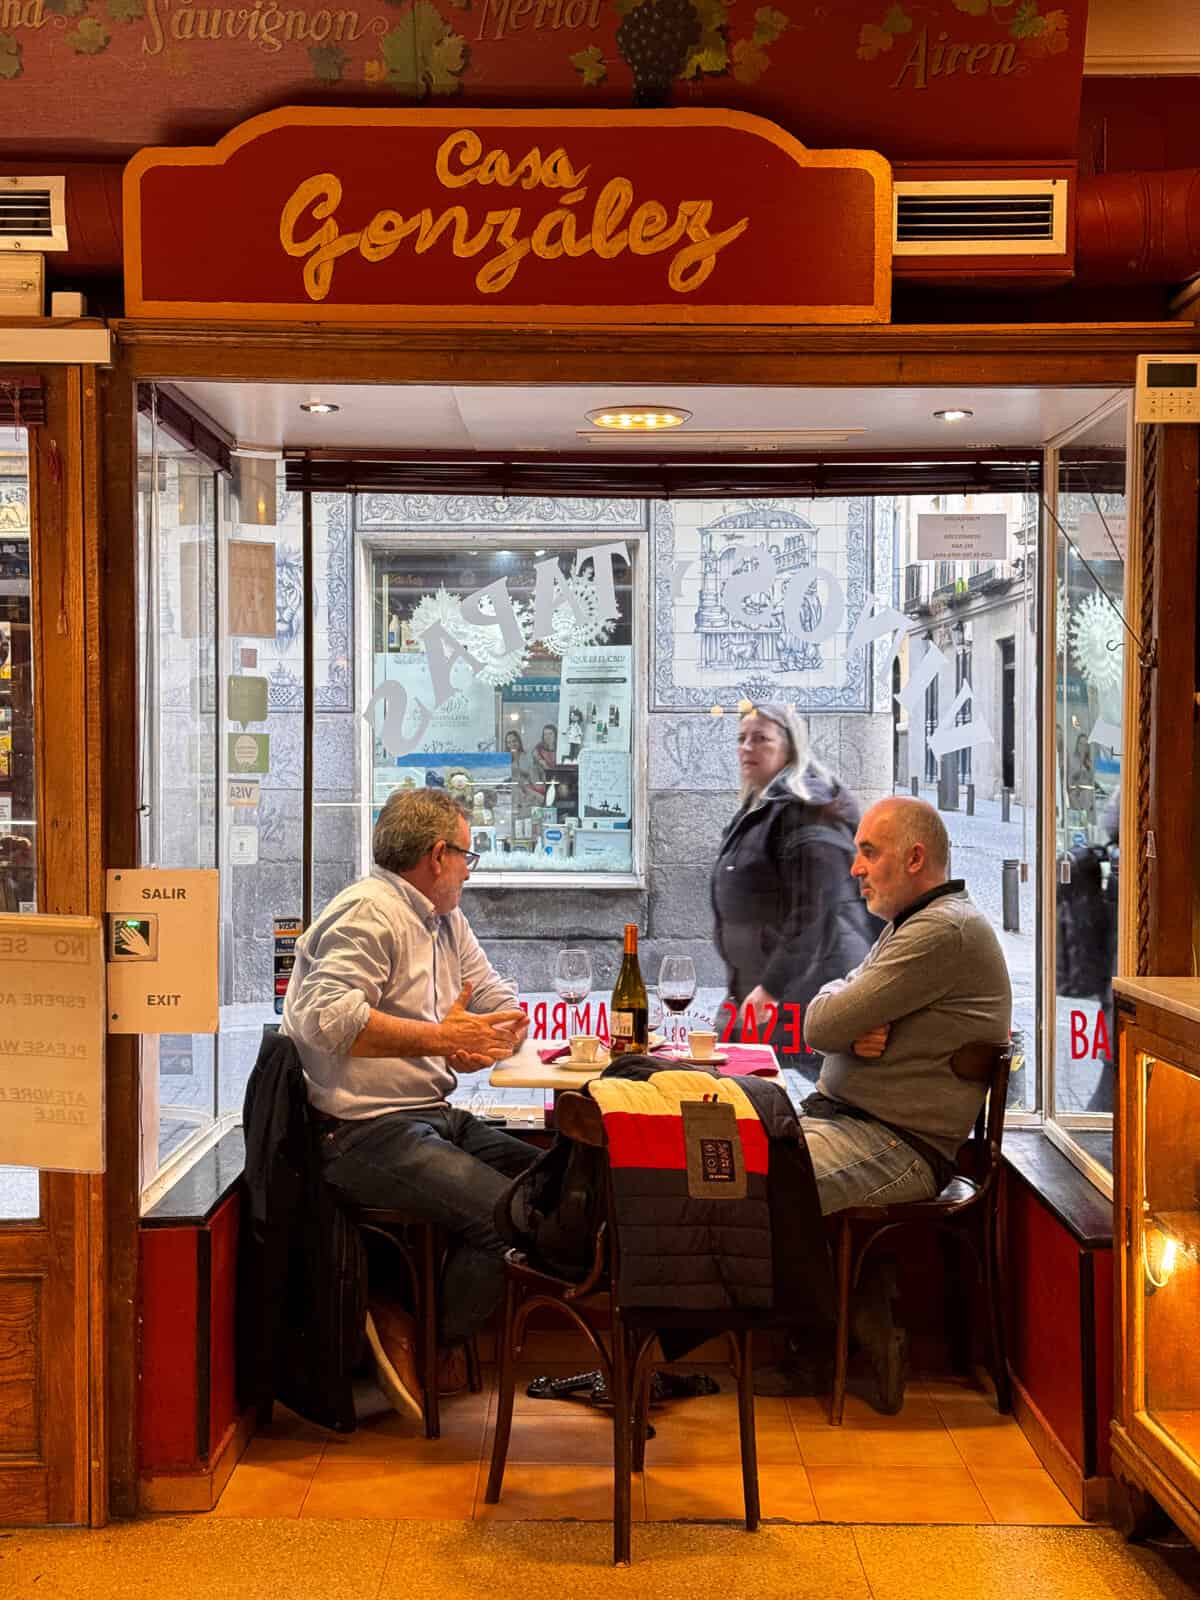 Two men engaged in conversation at a table inside Casa Gonzales, with wine and tapas between them, as a passerby blurs in motion outside the quaint window-front.